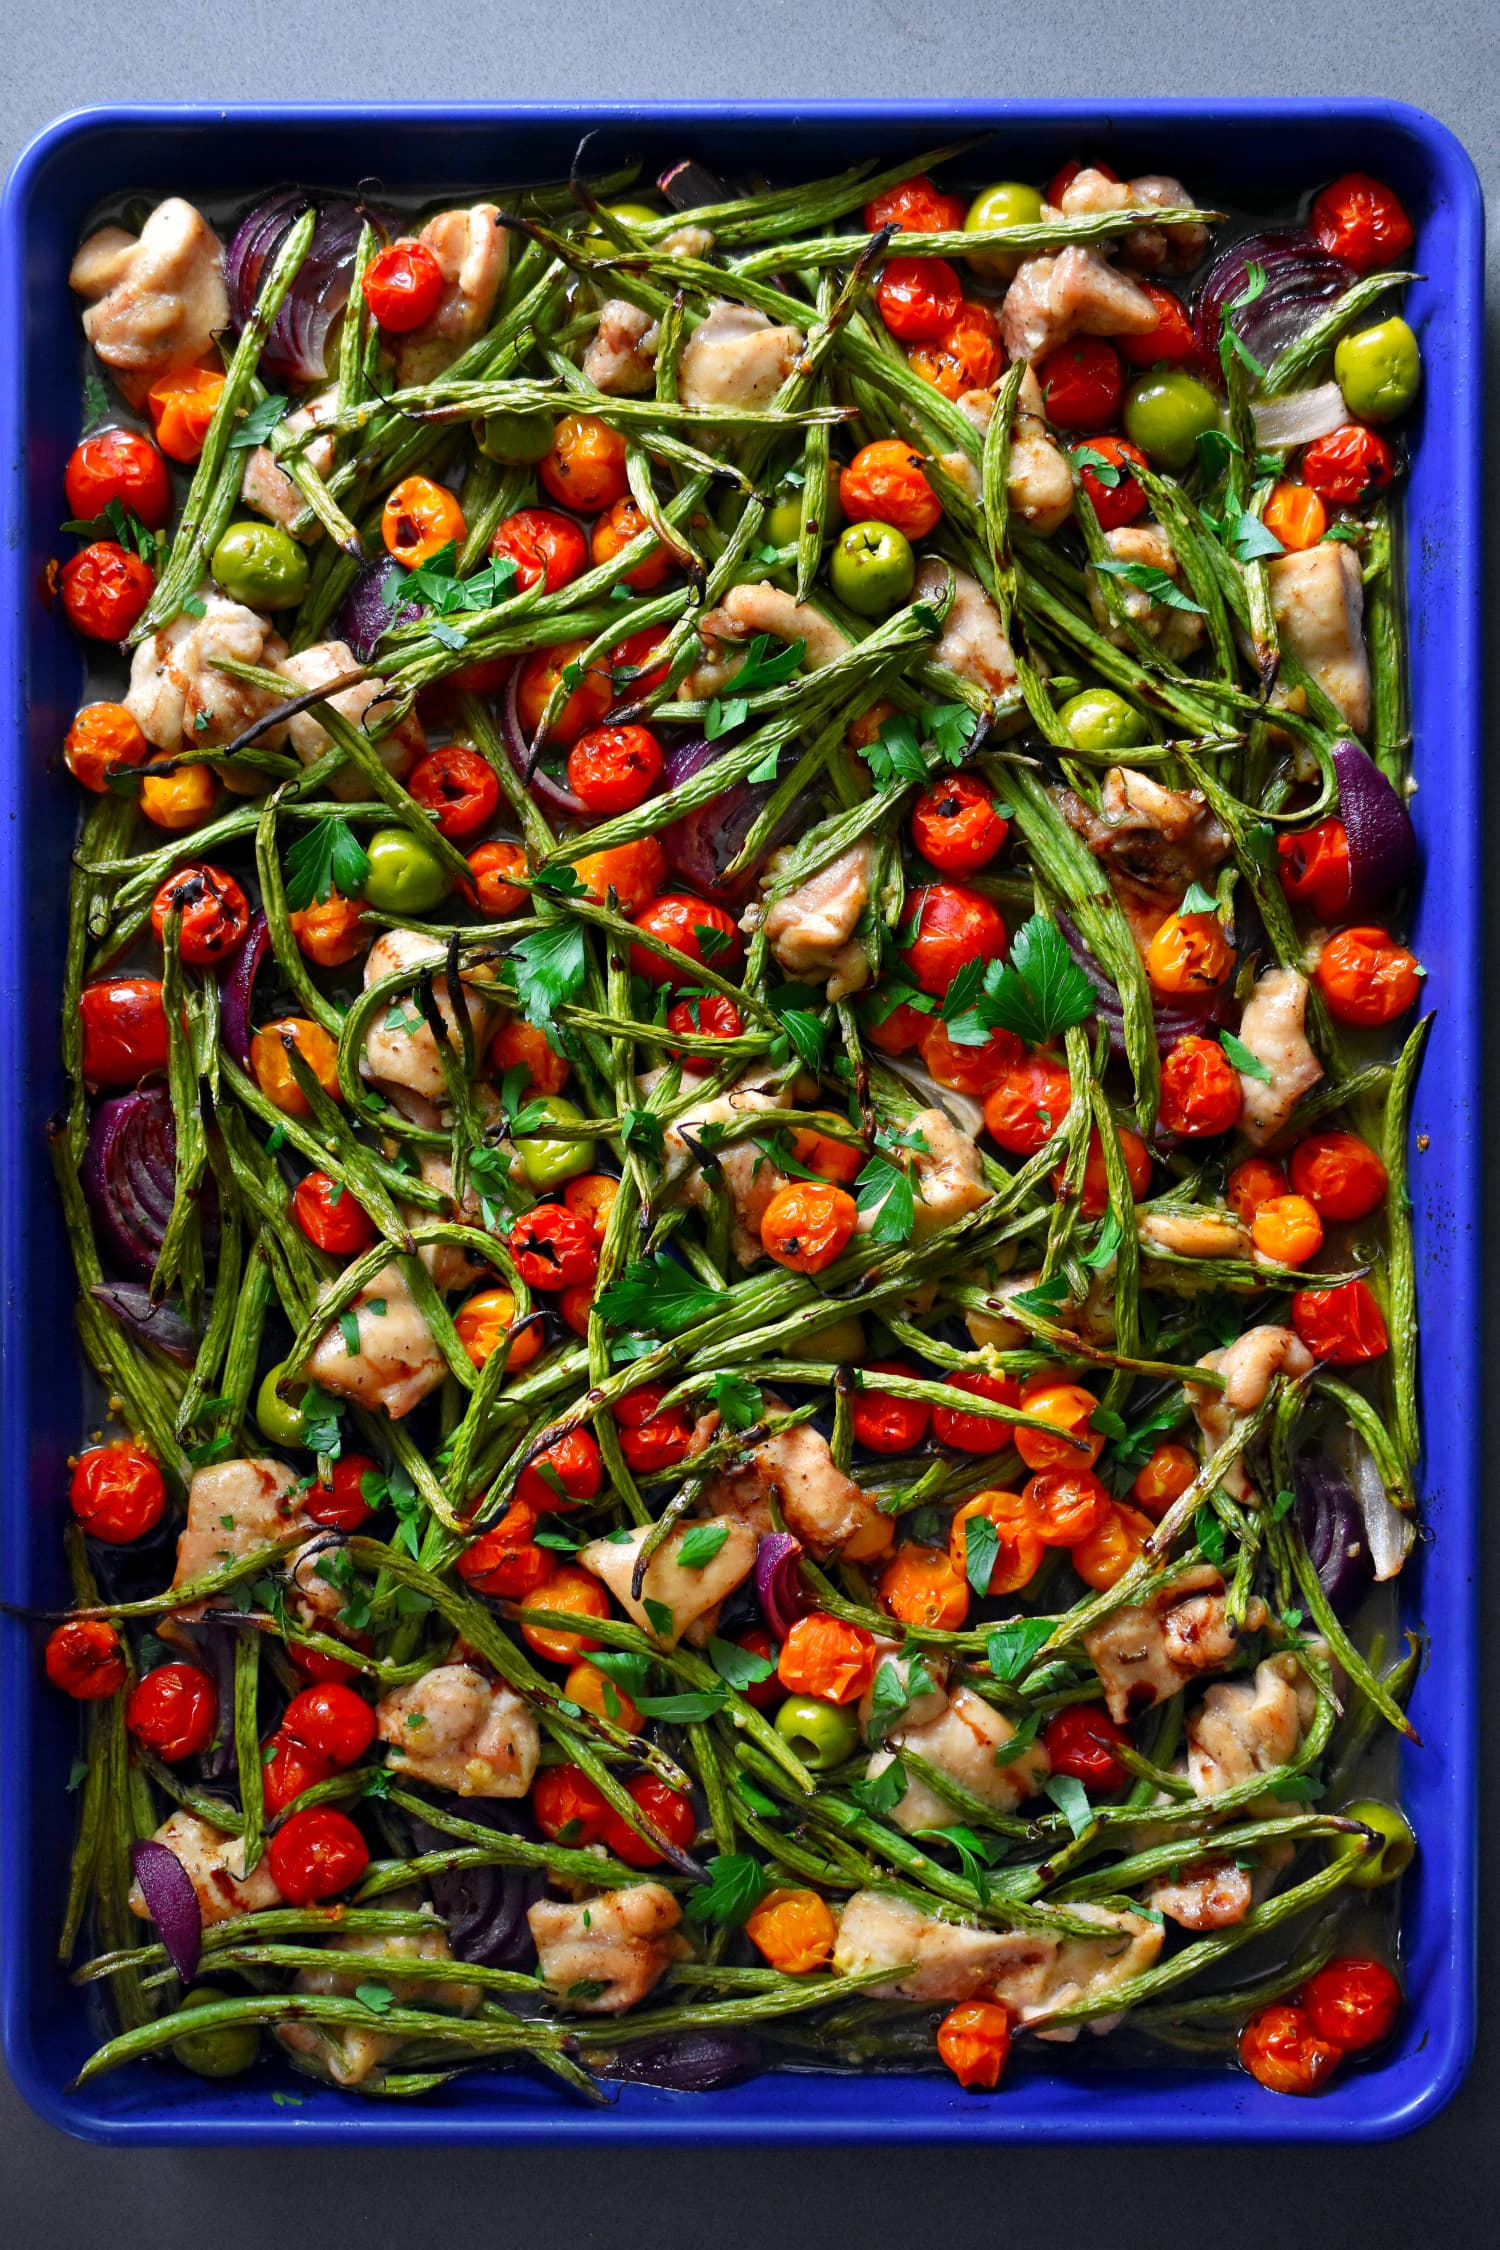 SHEET PAN DINNERS - cover